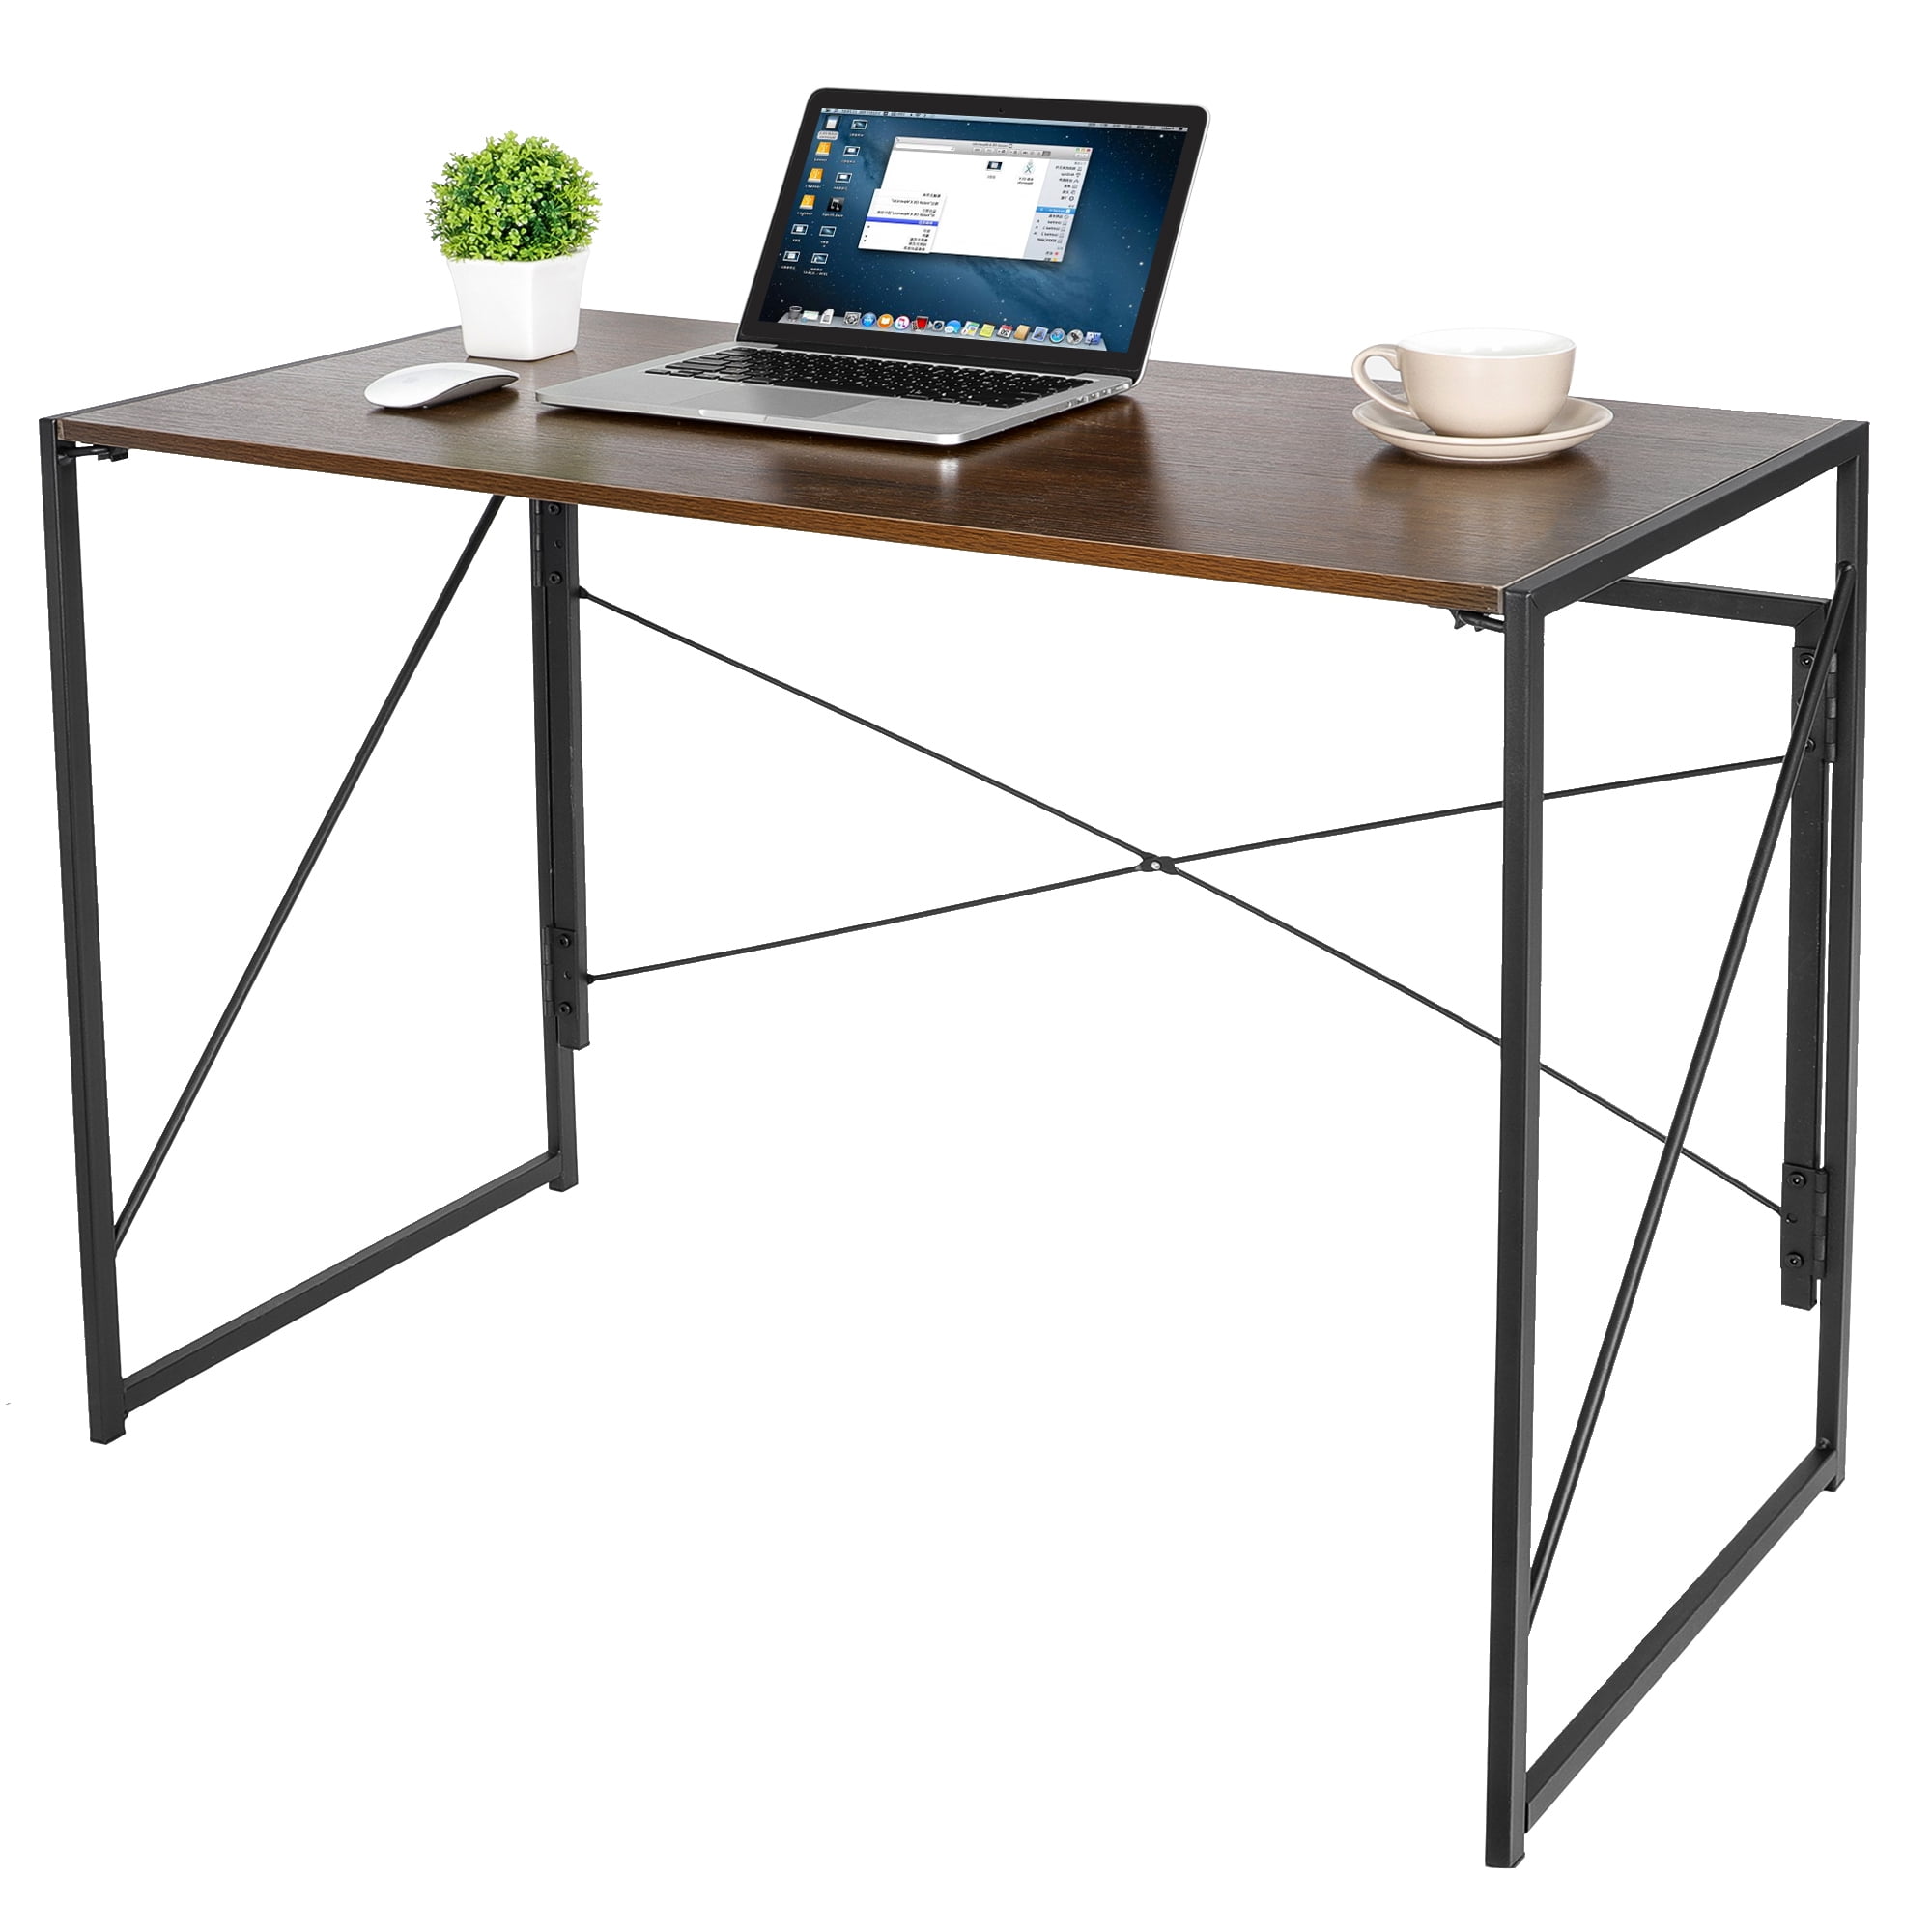 Small Foldable Computer Desk Folding Laptop Study Game PC Table Home Office 